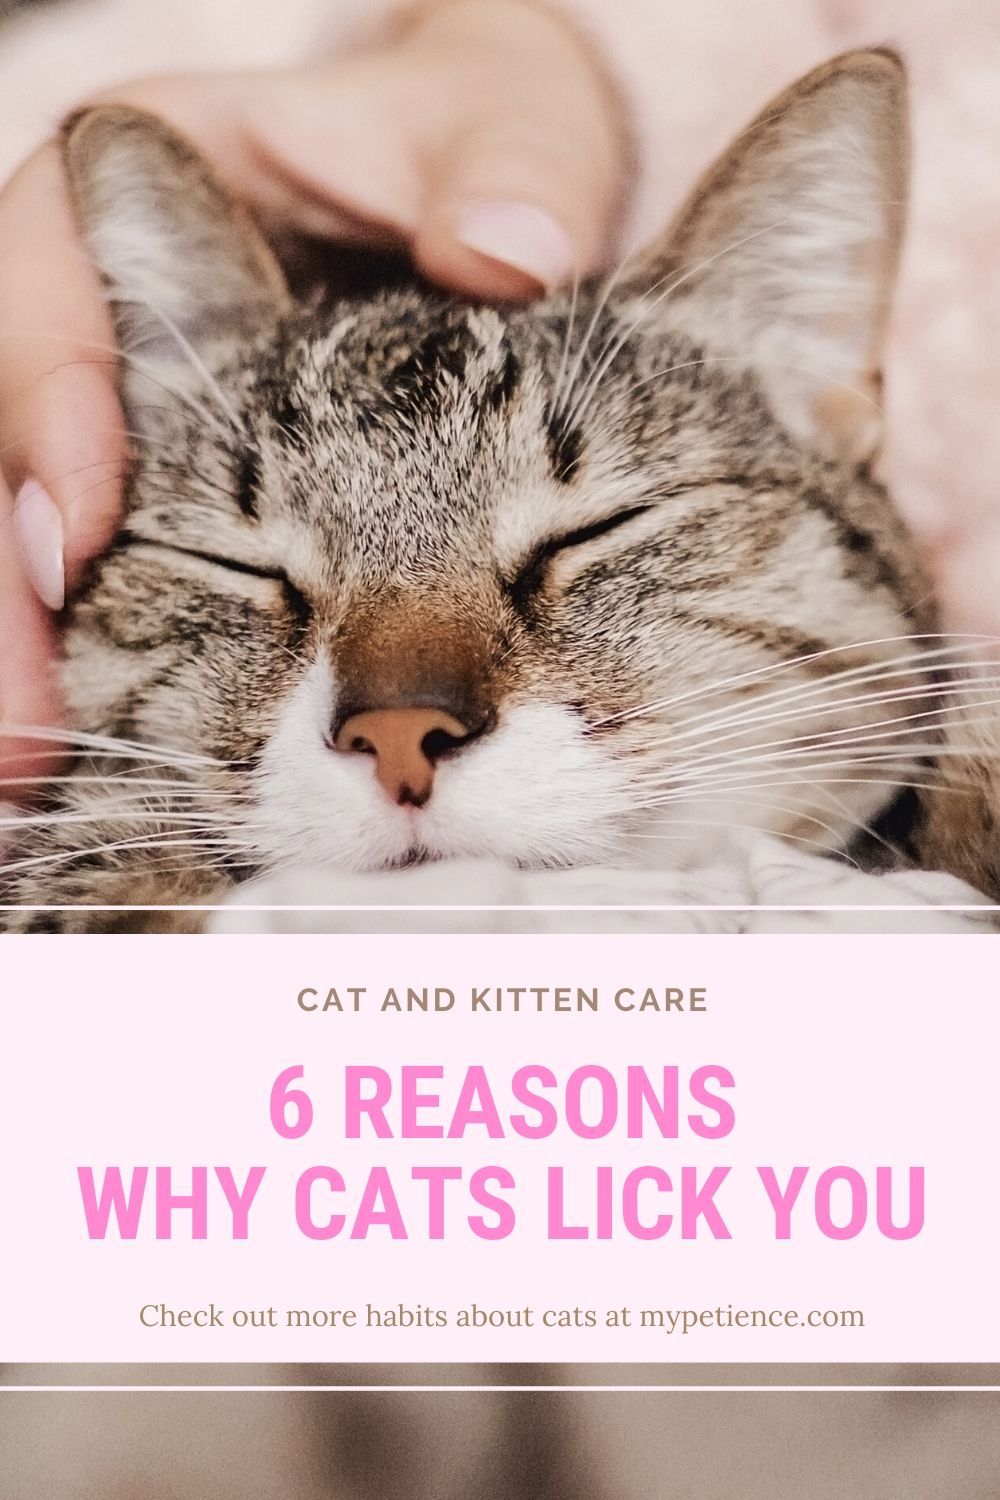 Why Does My Cat Lick My Hair?